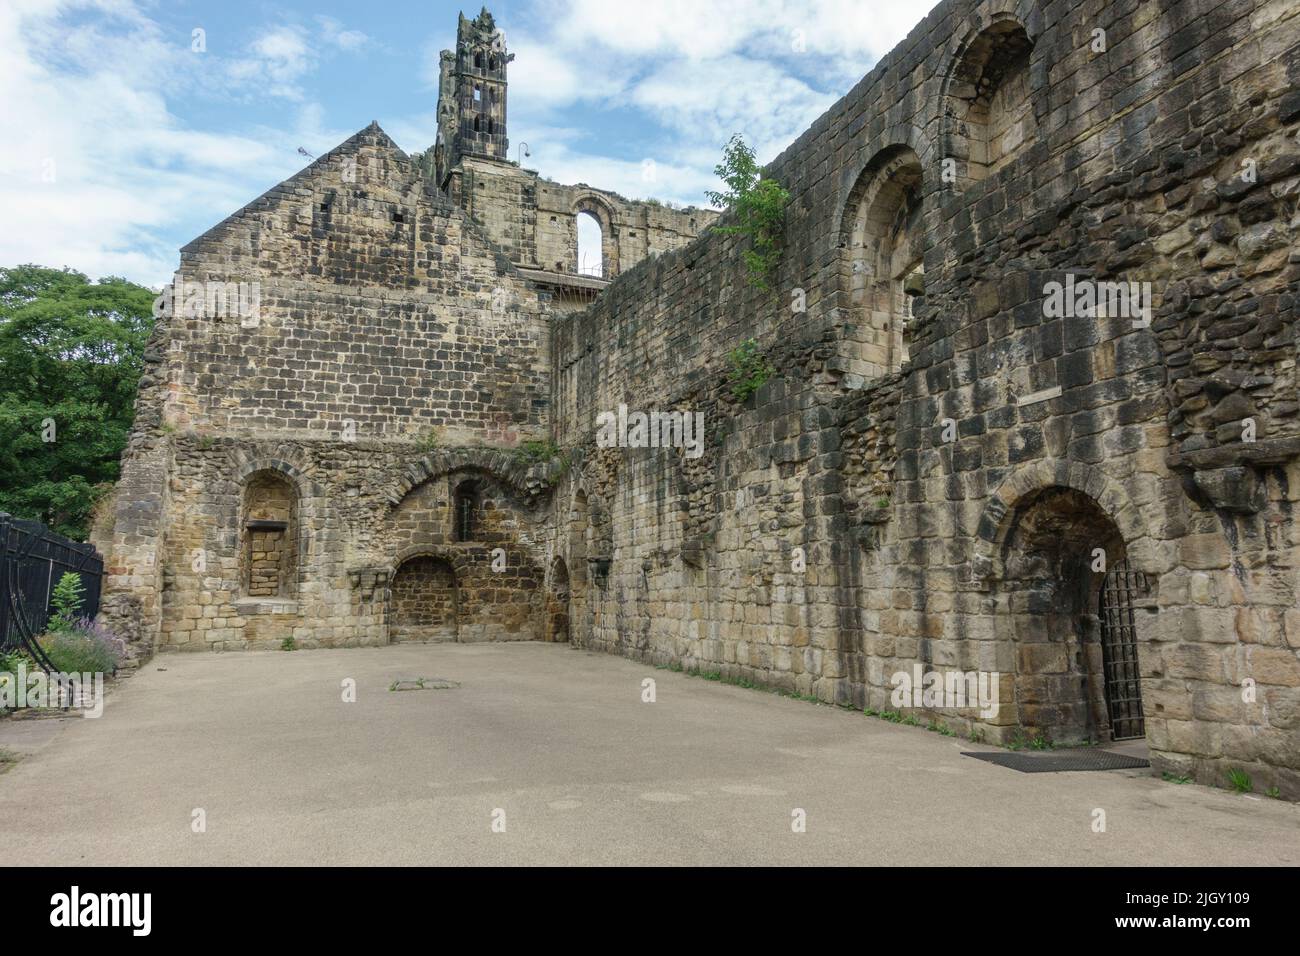 Lay brothers' dormitory in Kirkstall Abbey, a ruined Cistercian monastery in Kirkstall, north-west of Leeds, West Yorkshire, England. Stock Photo